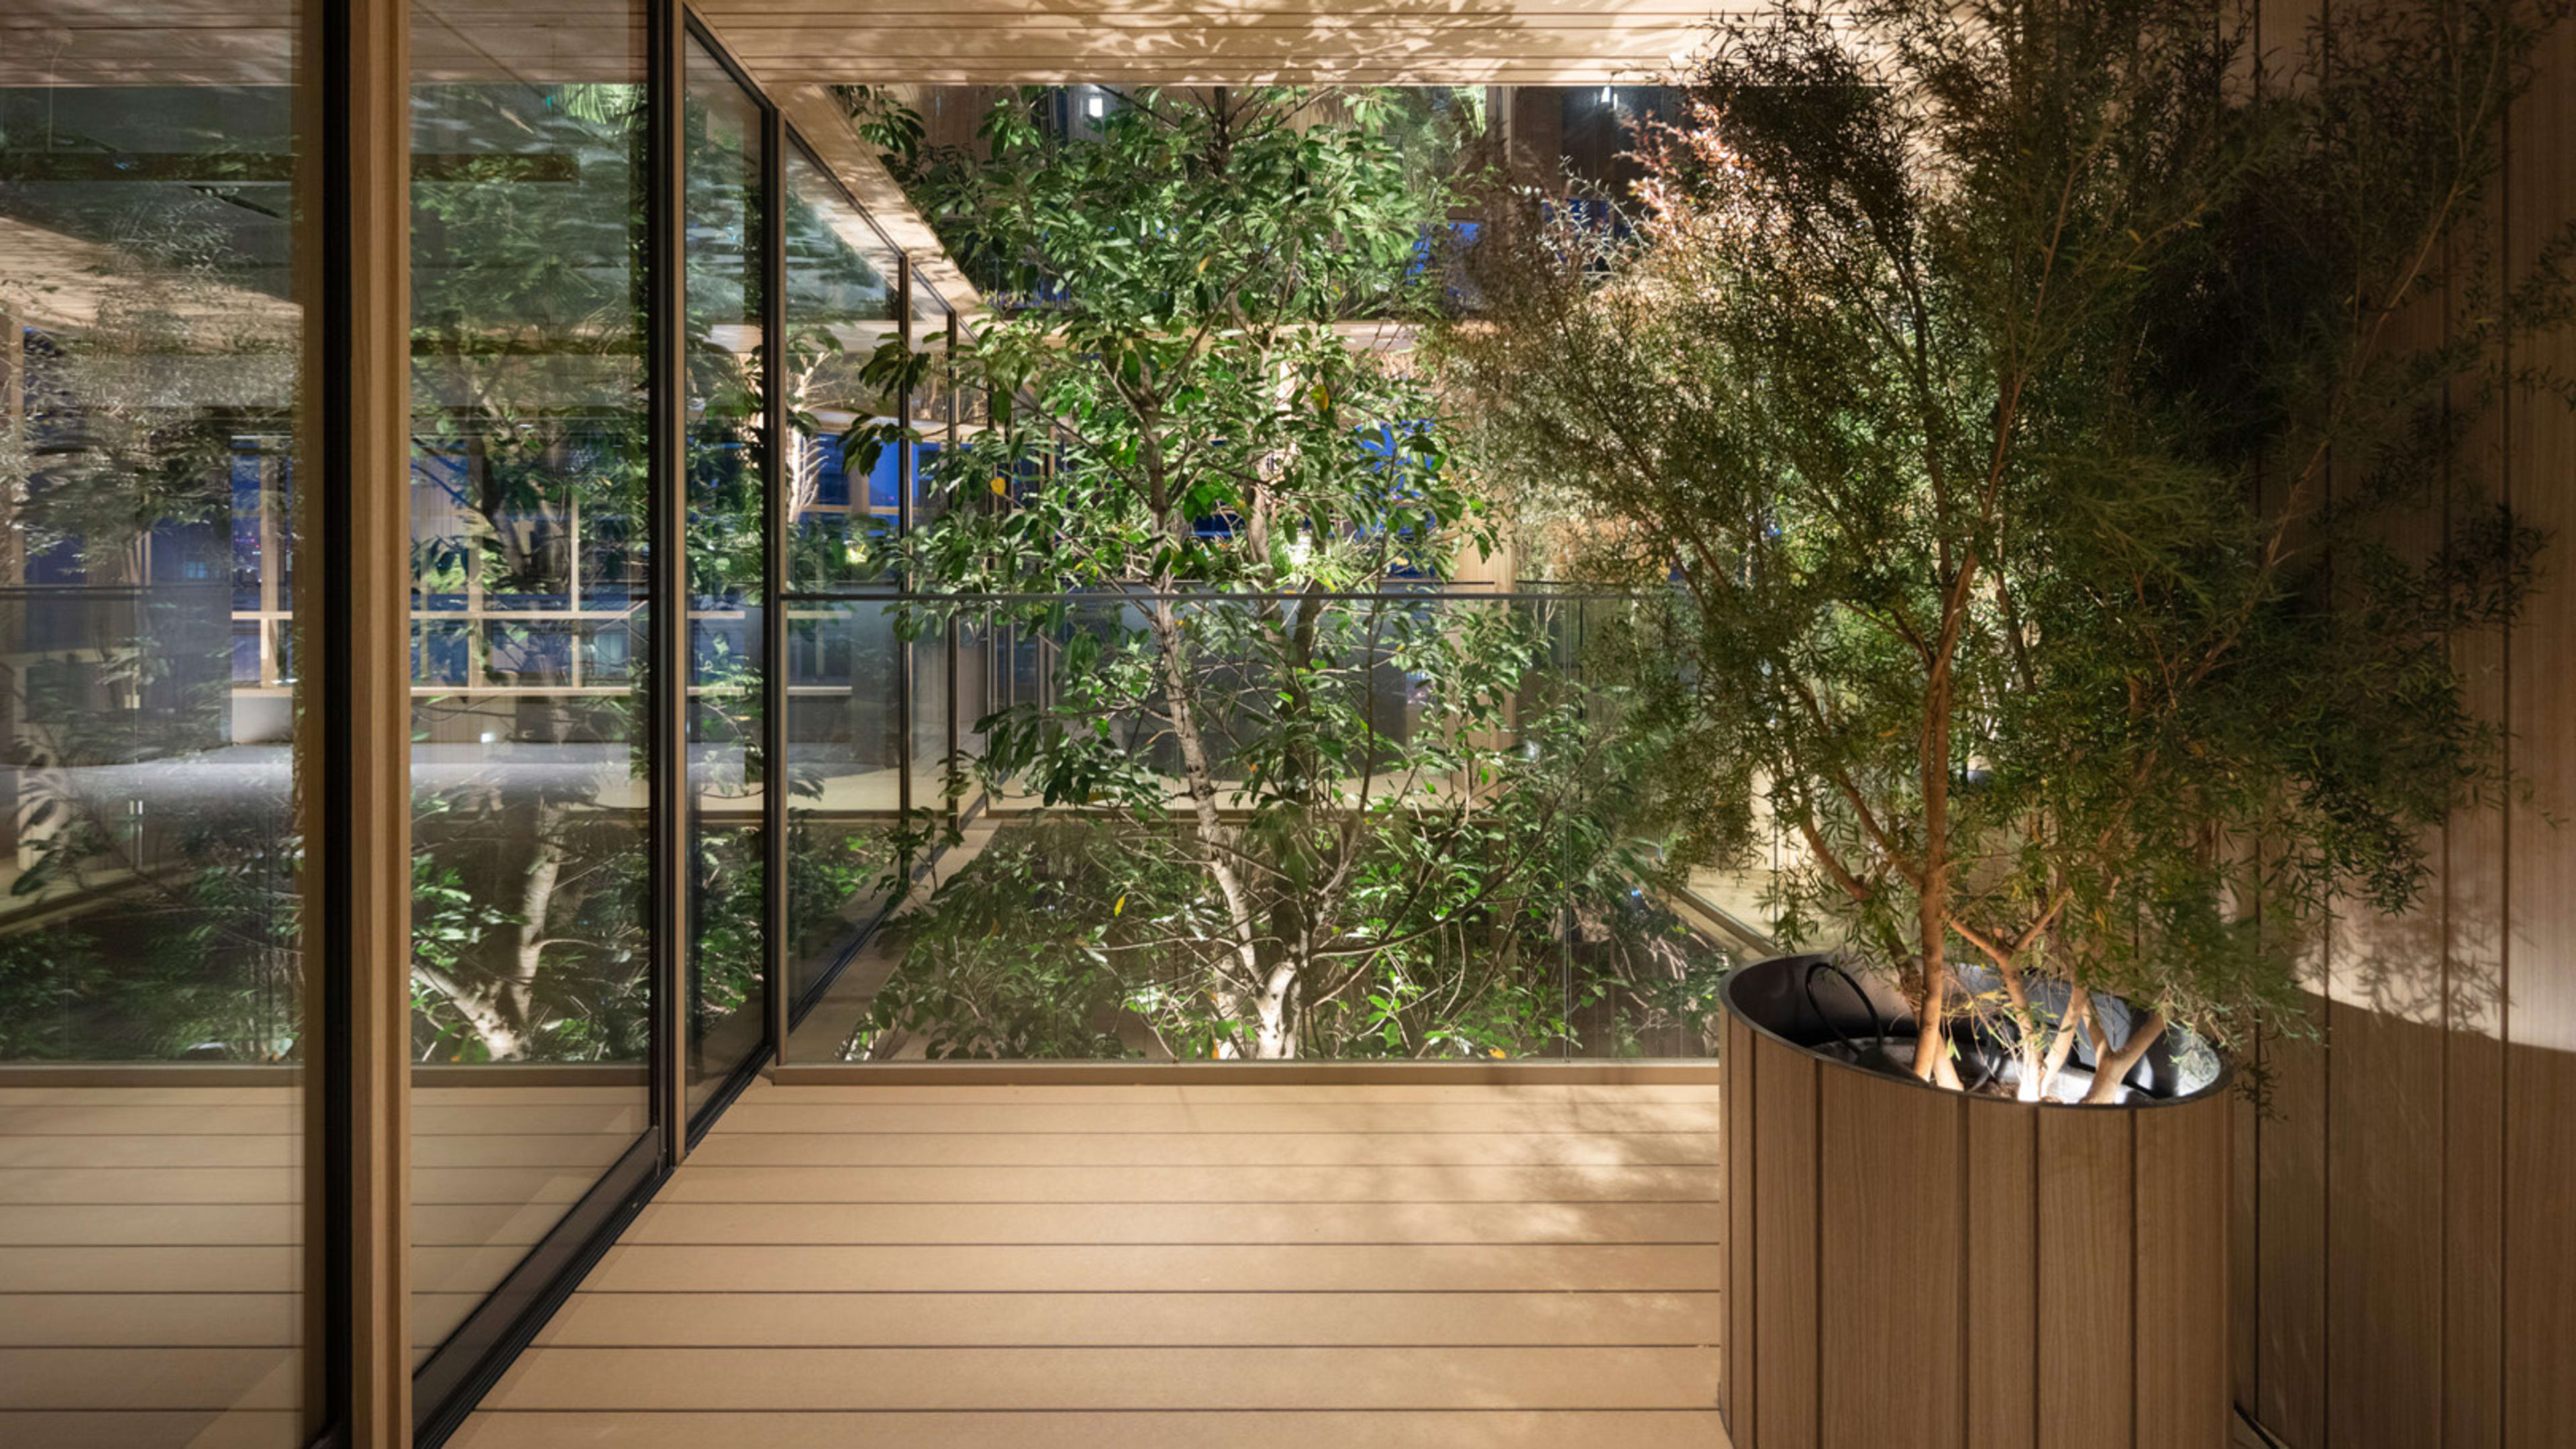 This gorgeous office is like working in a forest